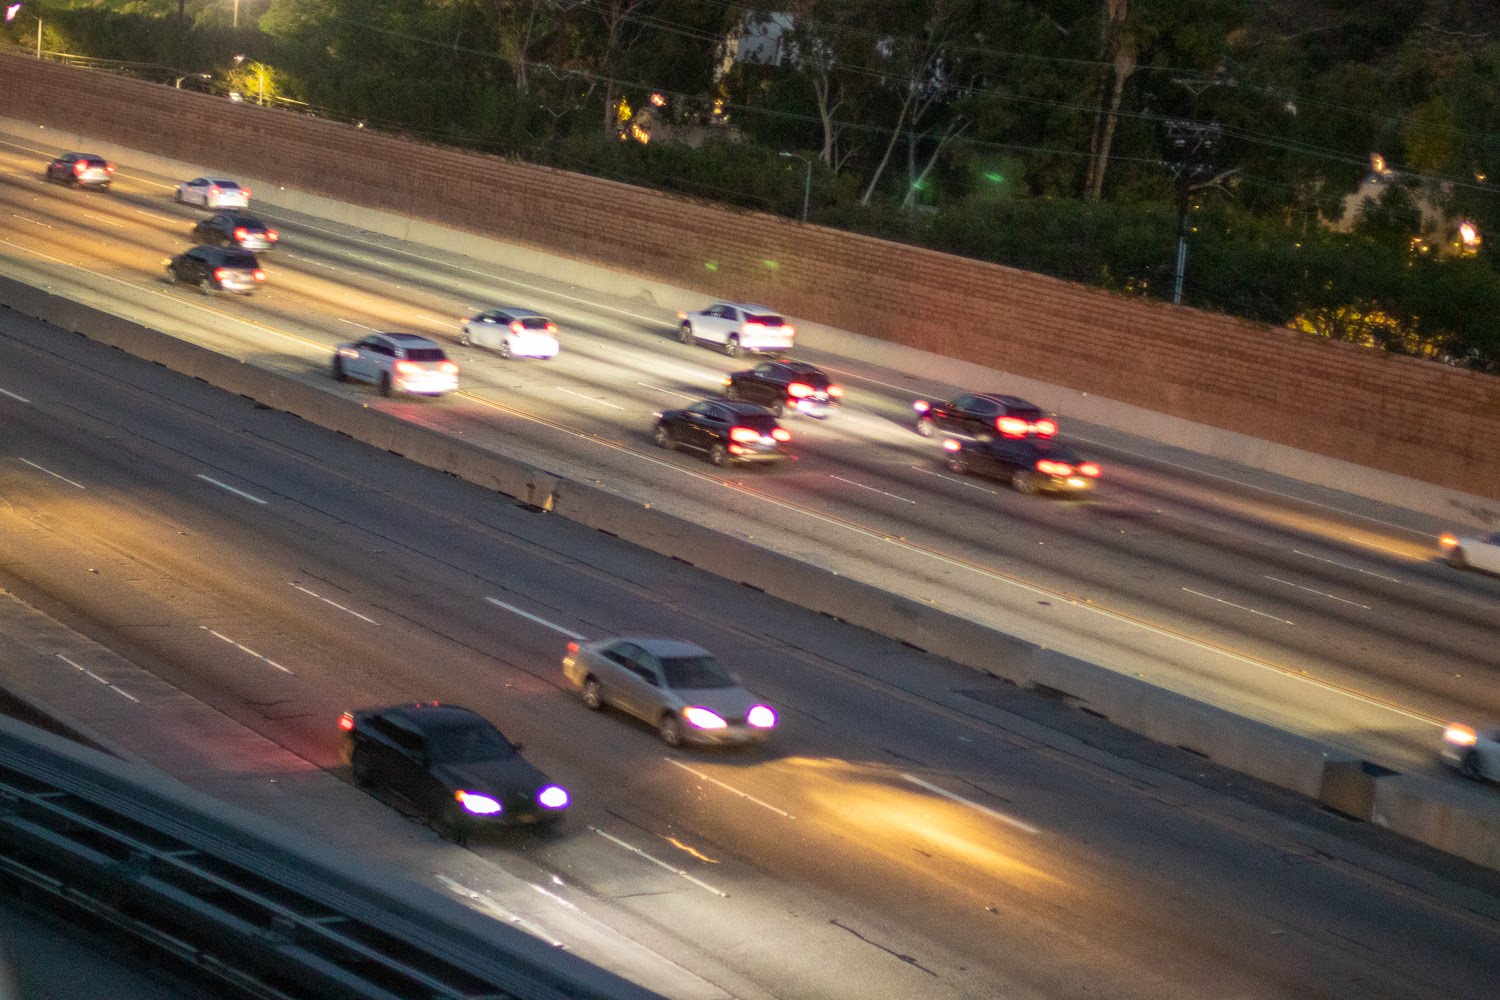 Redding, CA – 3 cars collided on Interstate 5 in Redding Friday night, leaving 1 injured, 1 dead